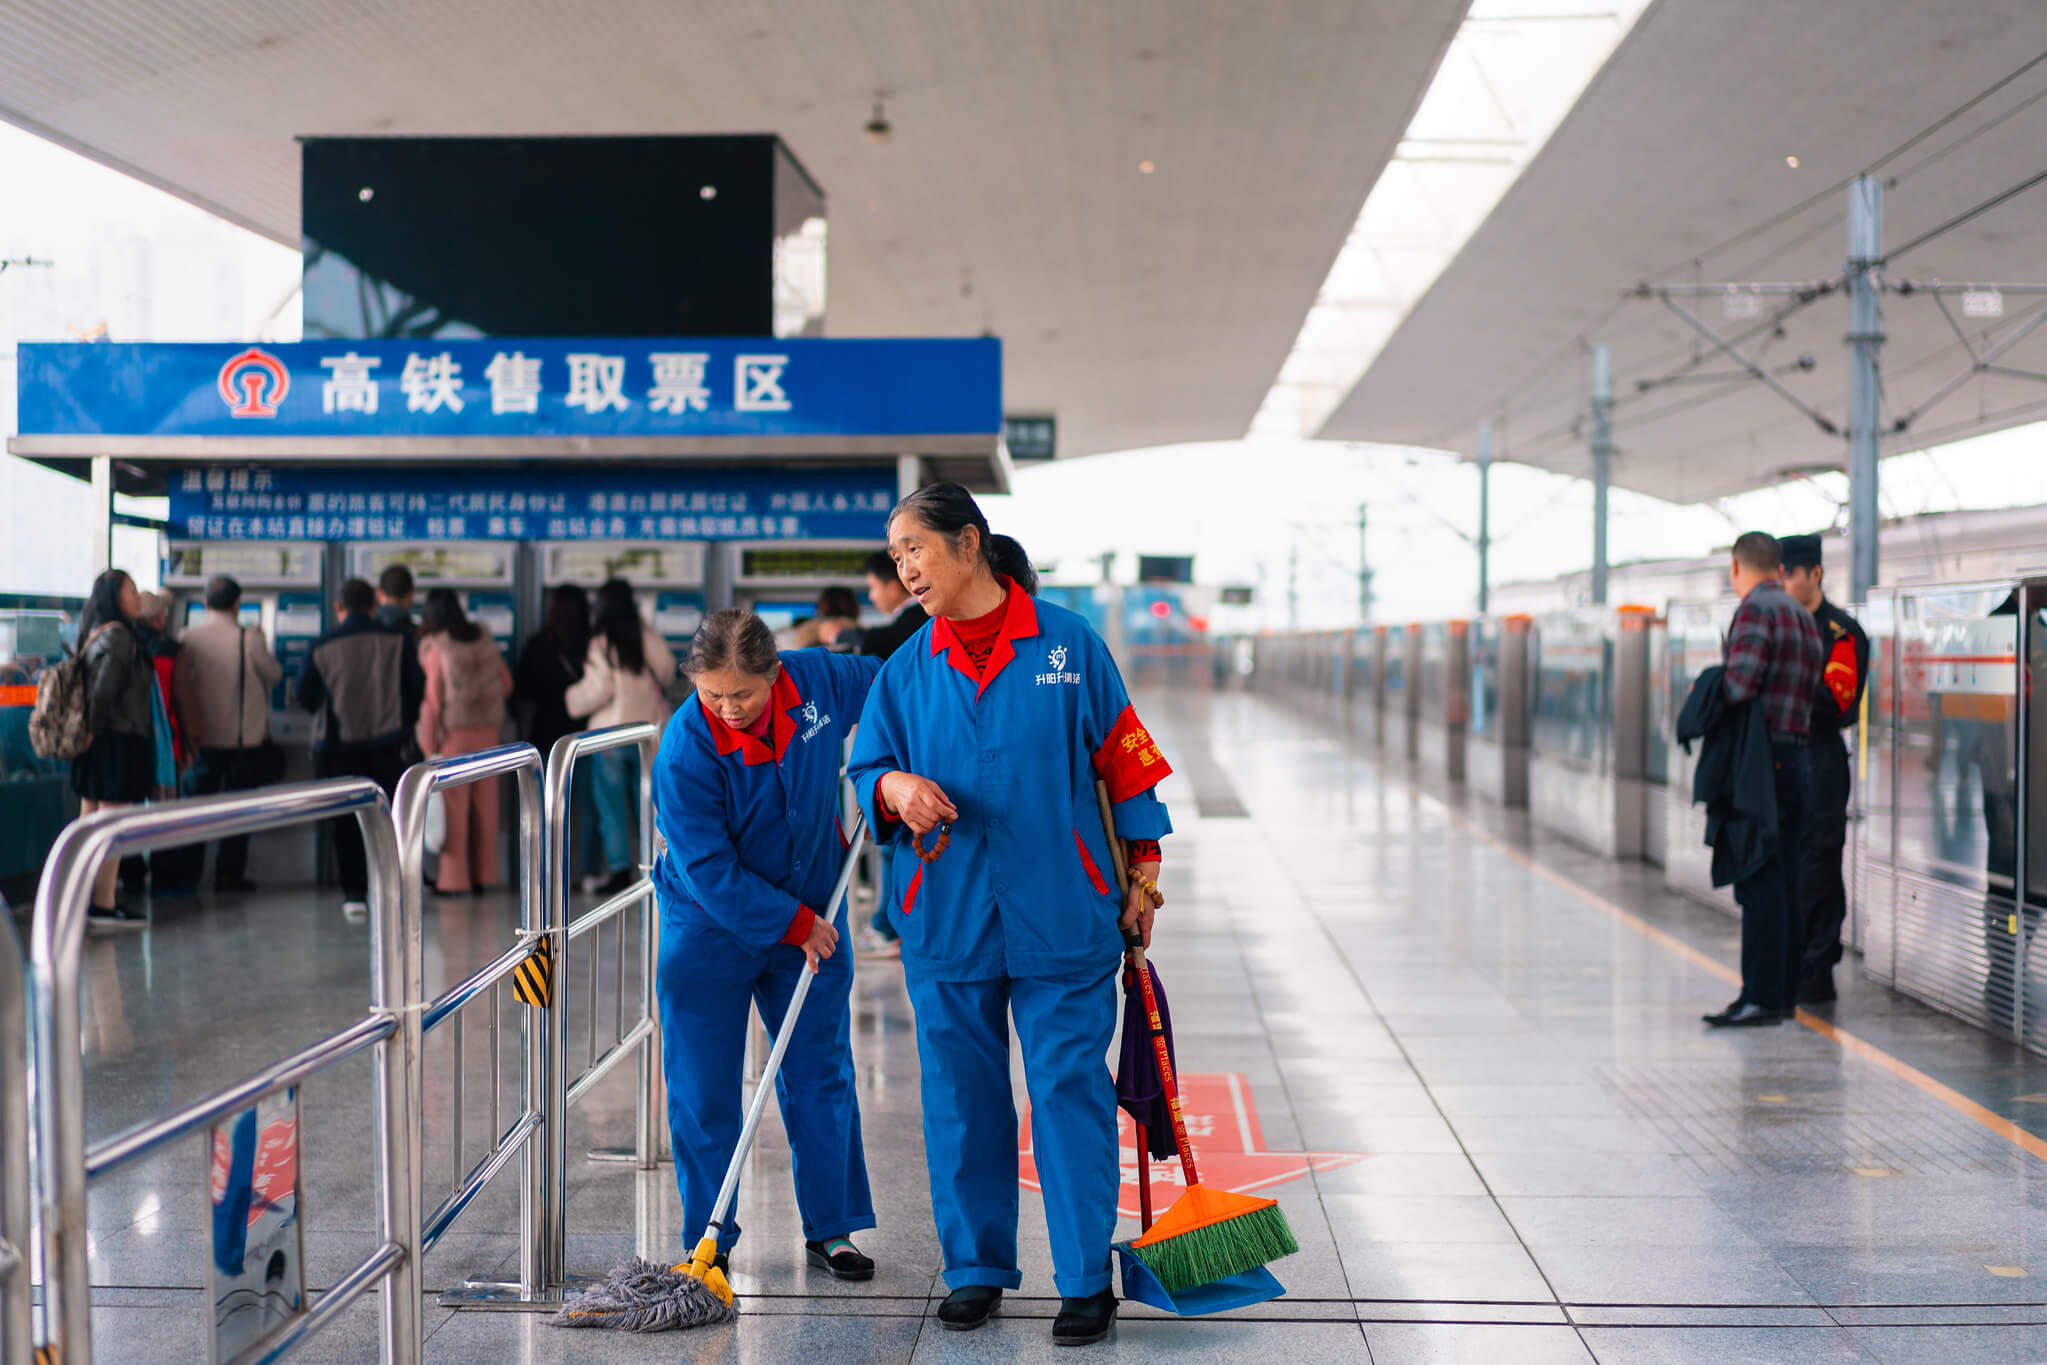 VanderLugt - Cleaning staff at train station in Chengdu, China in 2019. Kristoffer Trolle - Flickr